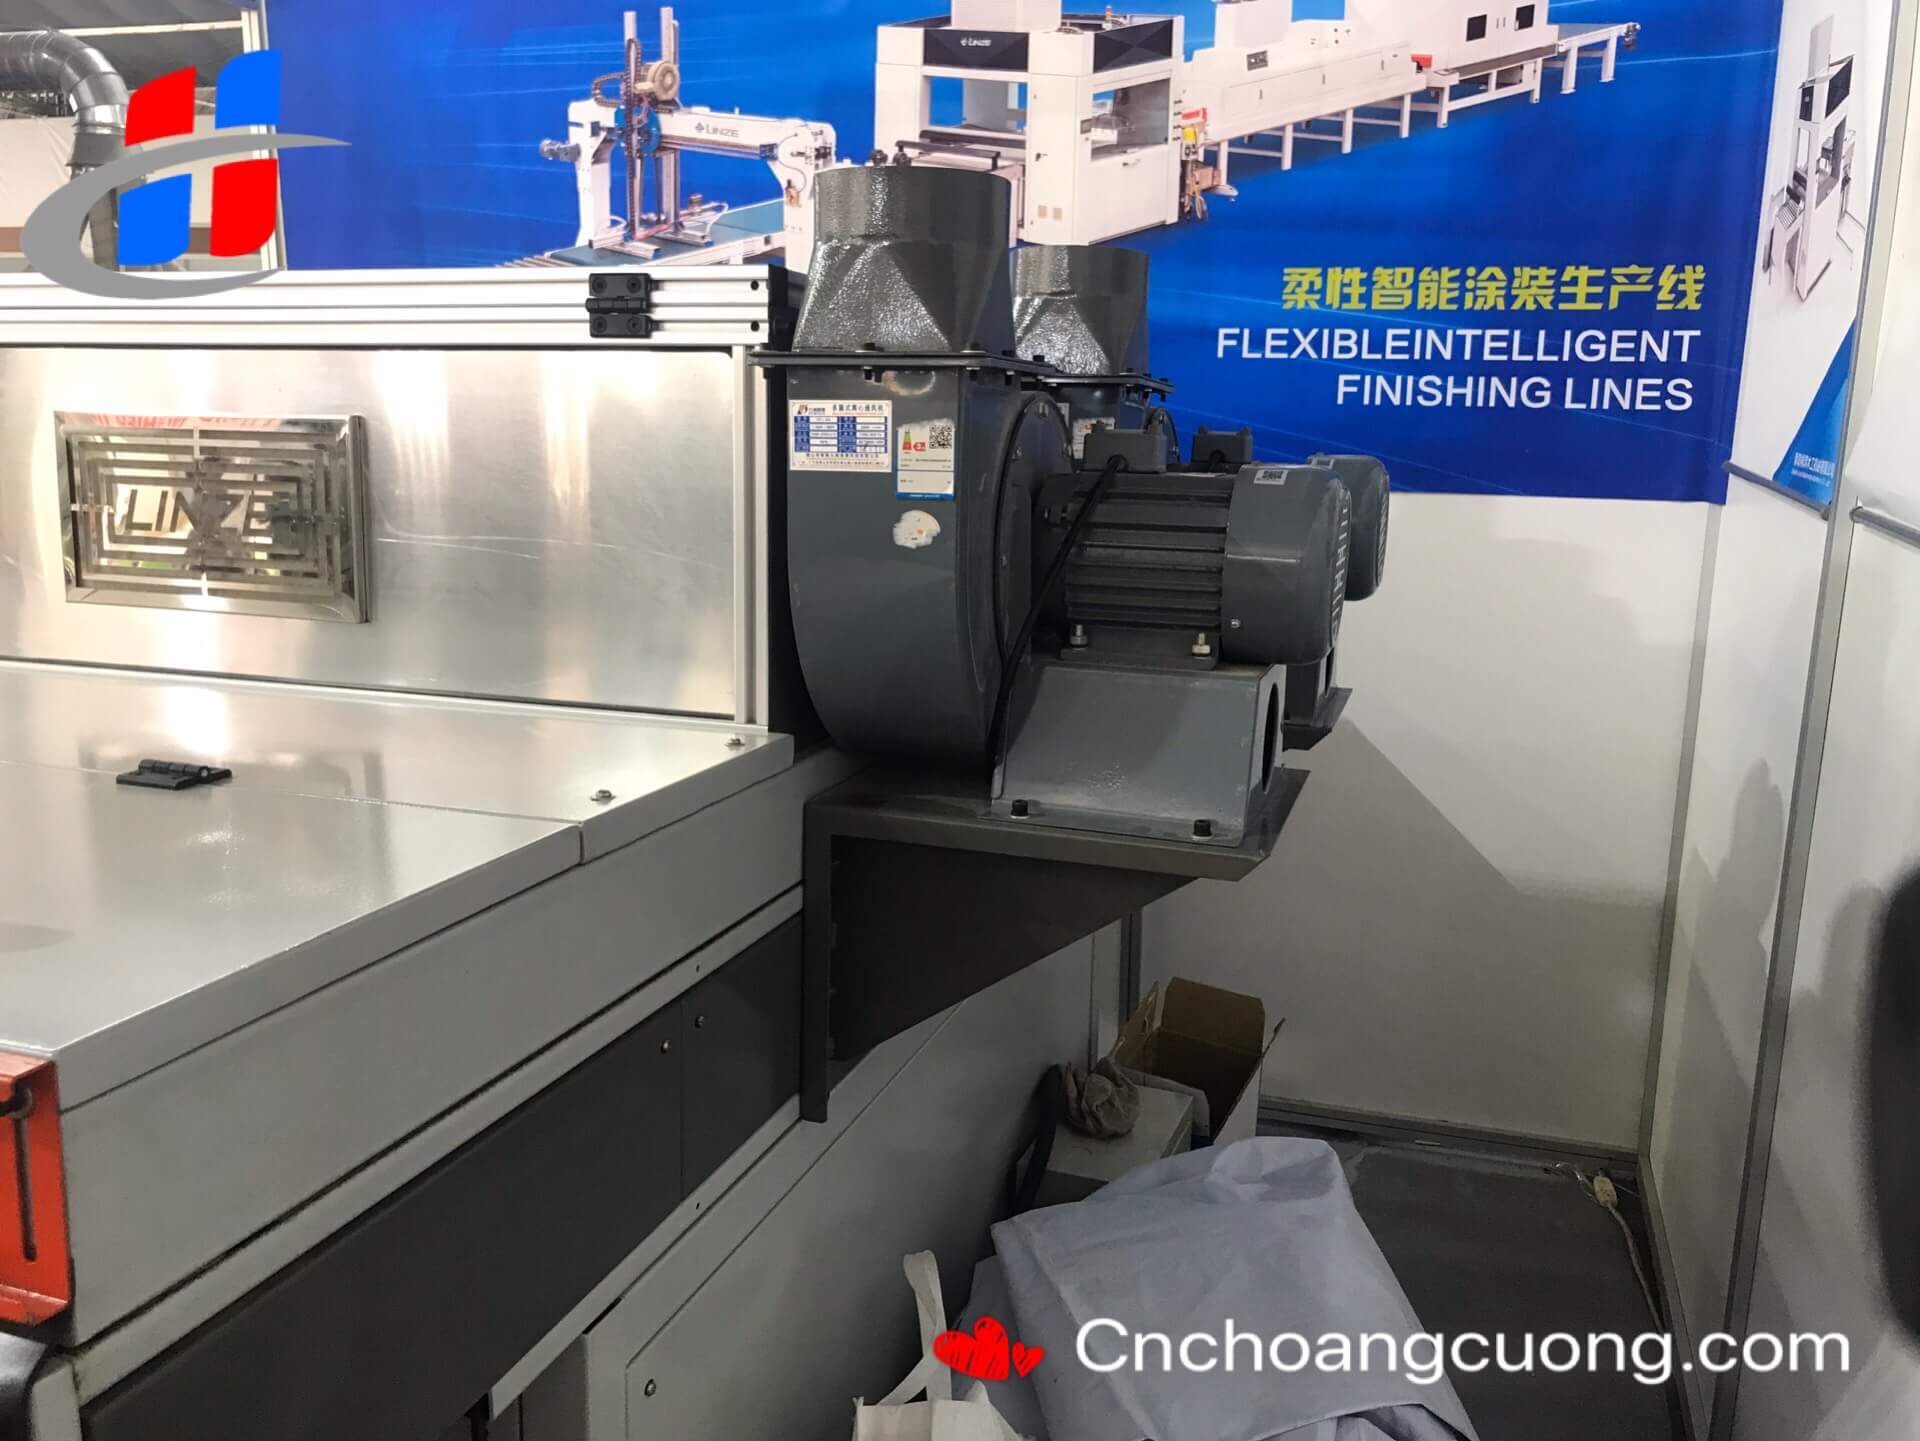 https://cnchoangcuong.com/?post_type=product&p=1790&preview=true